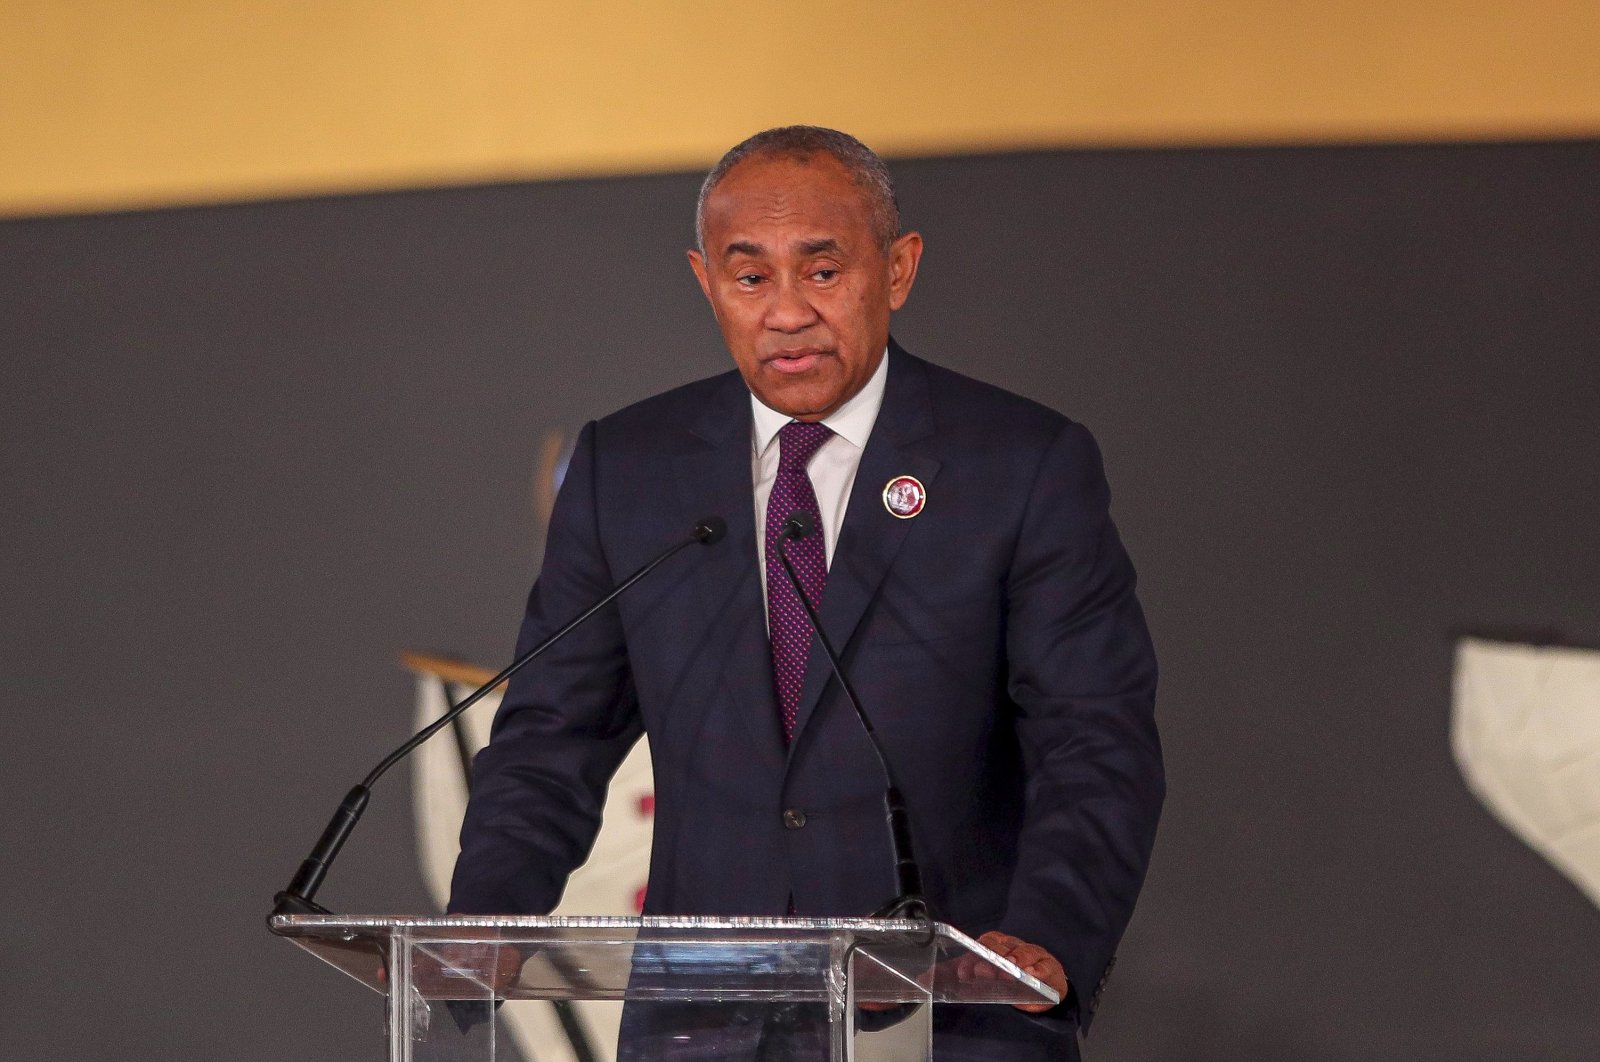 Confederation of African Football (CAF) President Ahmad Ahmad speaks during a World Cup qualification draw in Cairo, Egypt, Jan. 21, 2020. (AFP Photo)